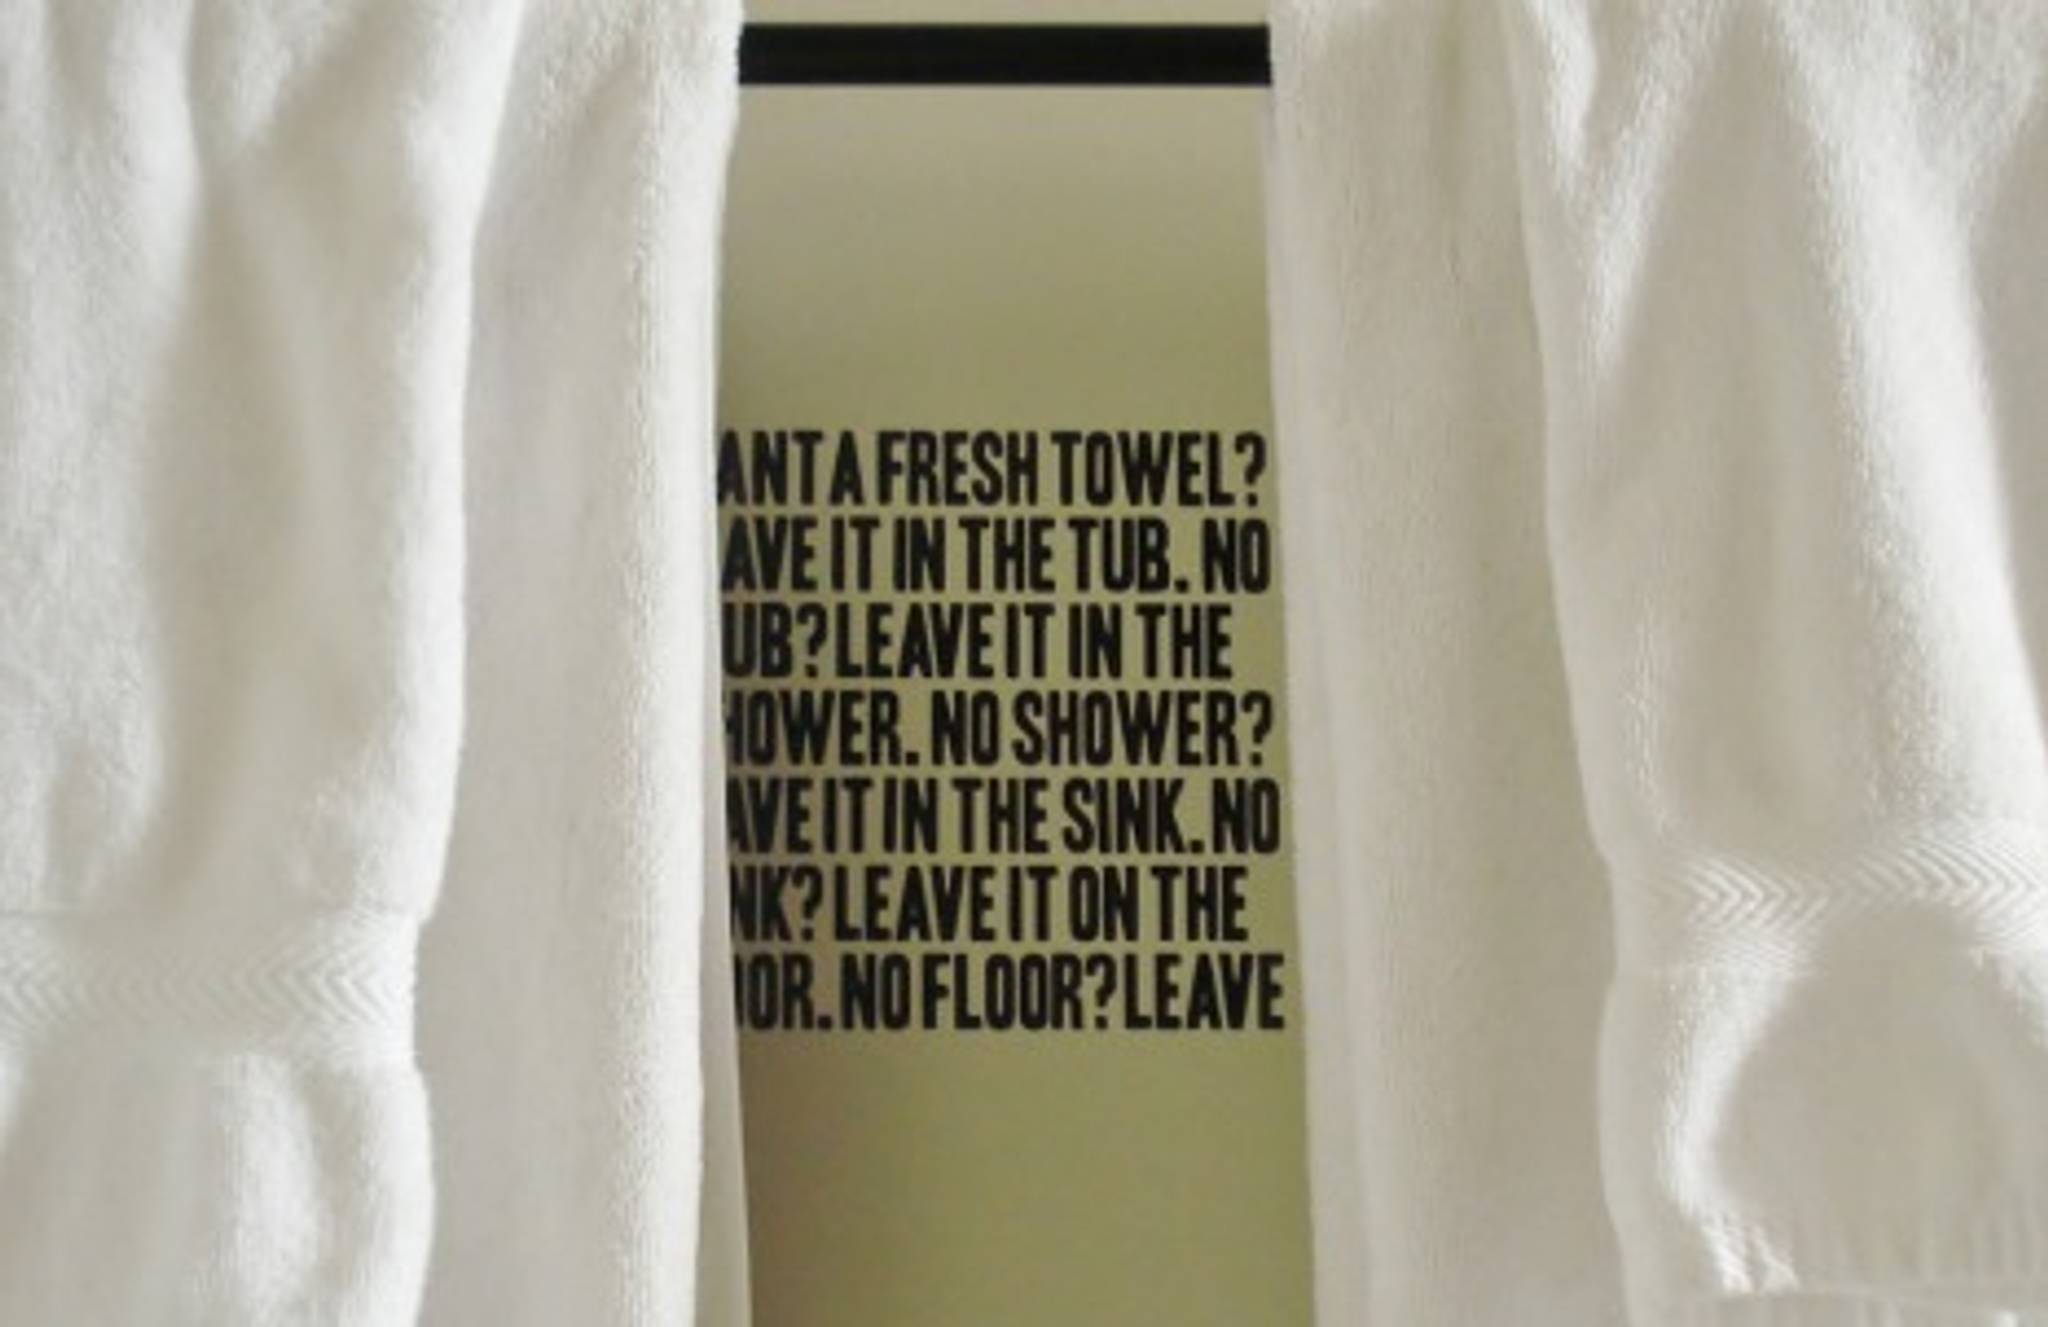 Nudging hotel towel re-use